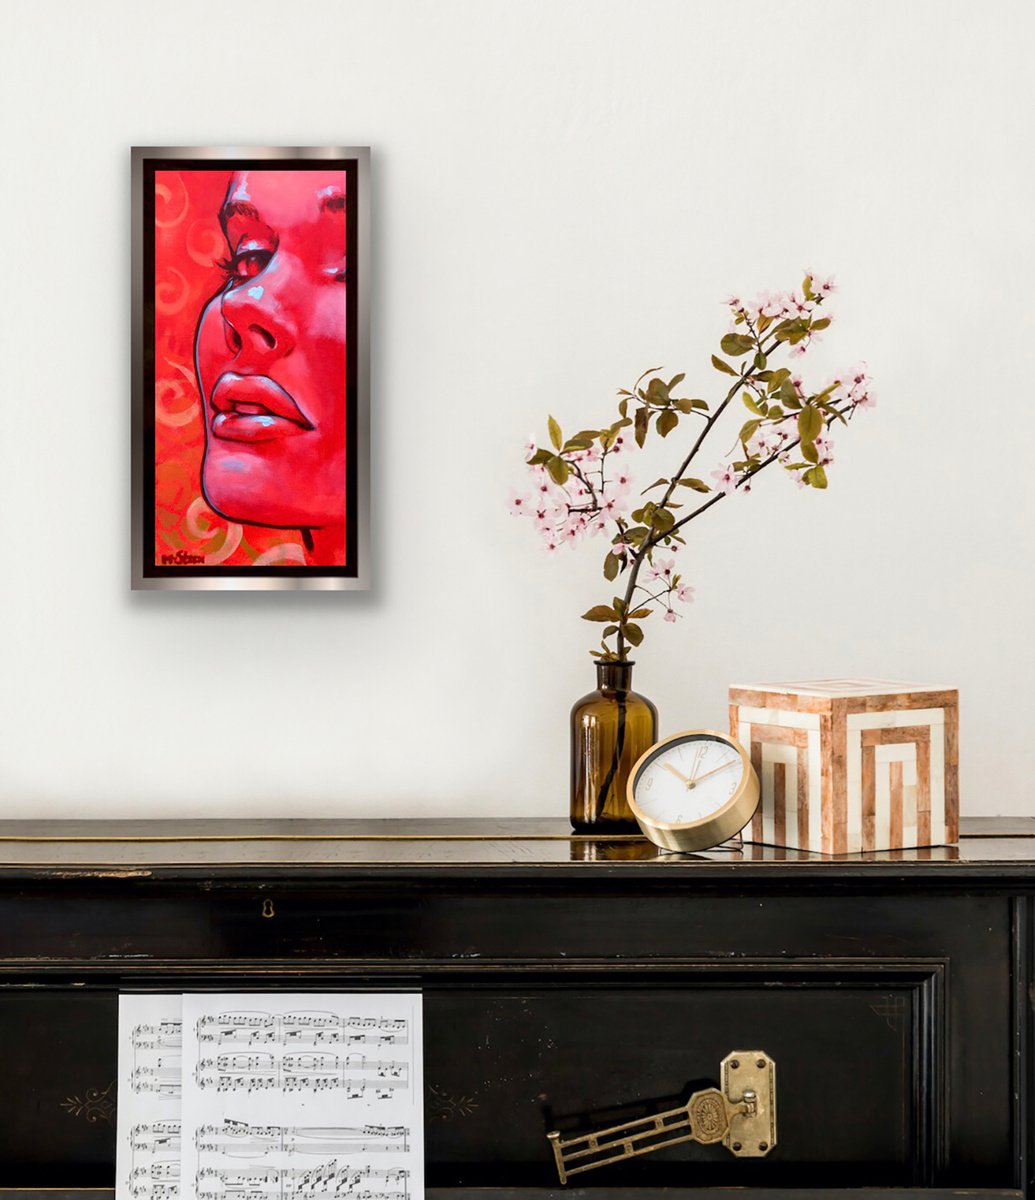 affordable small red surrealist pop art portrait: From within by Monique van Steen